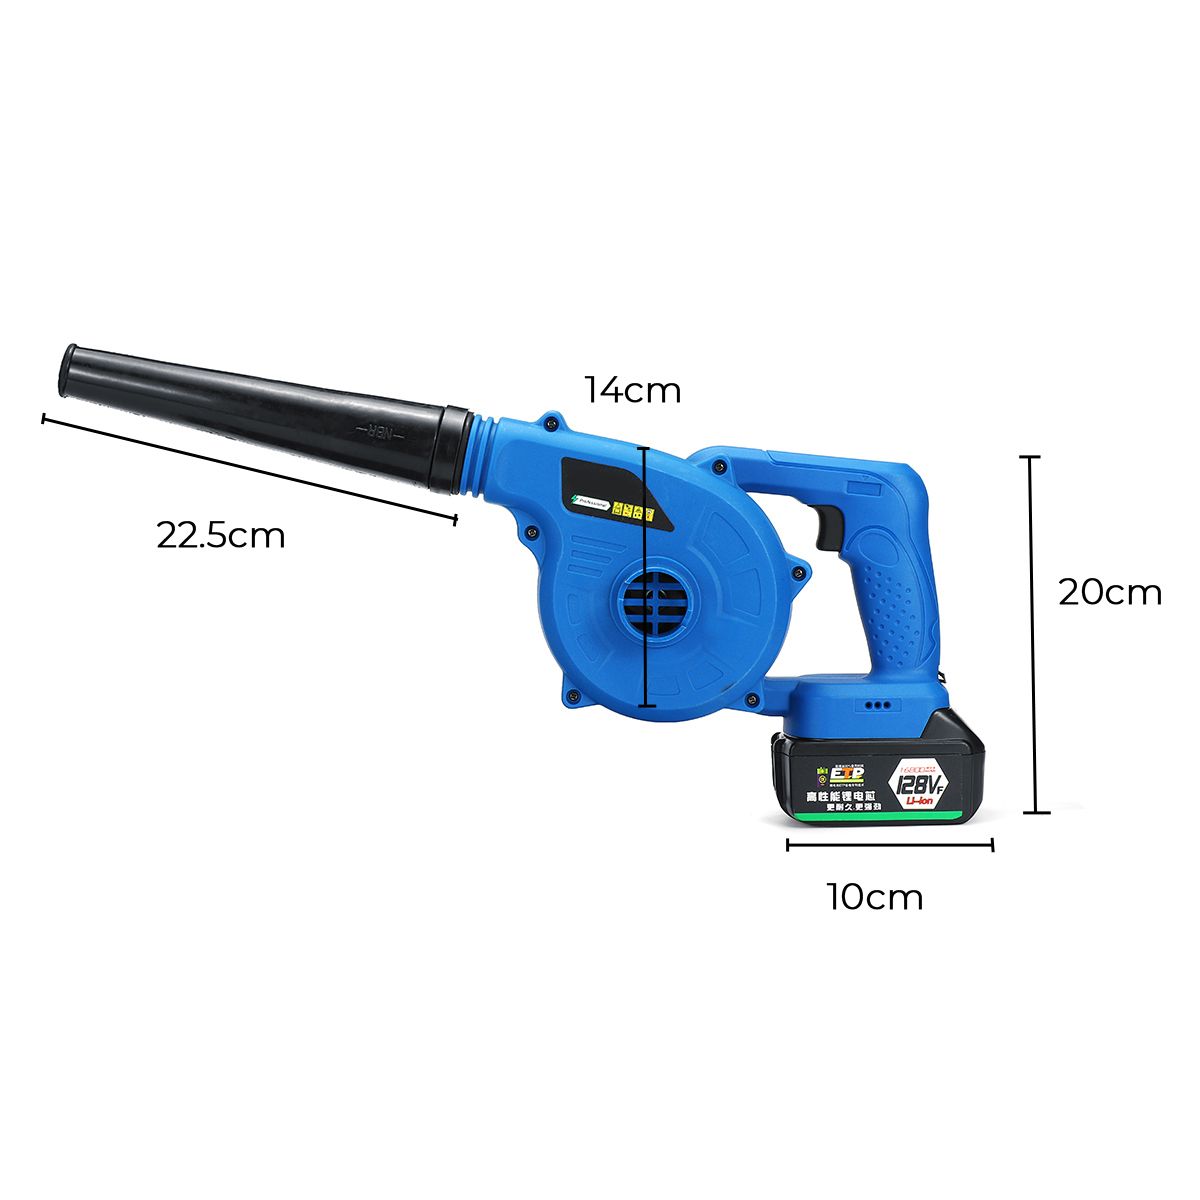 220v-1200W-Electric-Wireless-Handheld-Blower-Computer-Dust-Collector-Rechargeable-Lithium-One-Batter-1562214